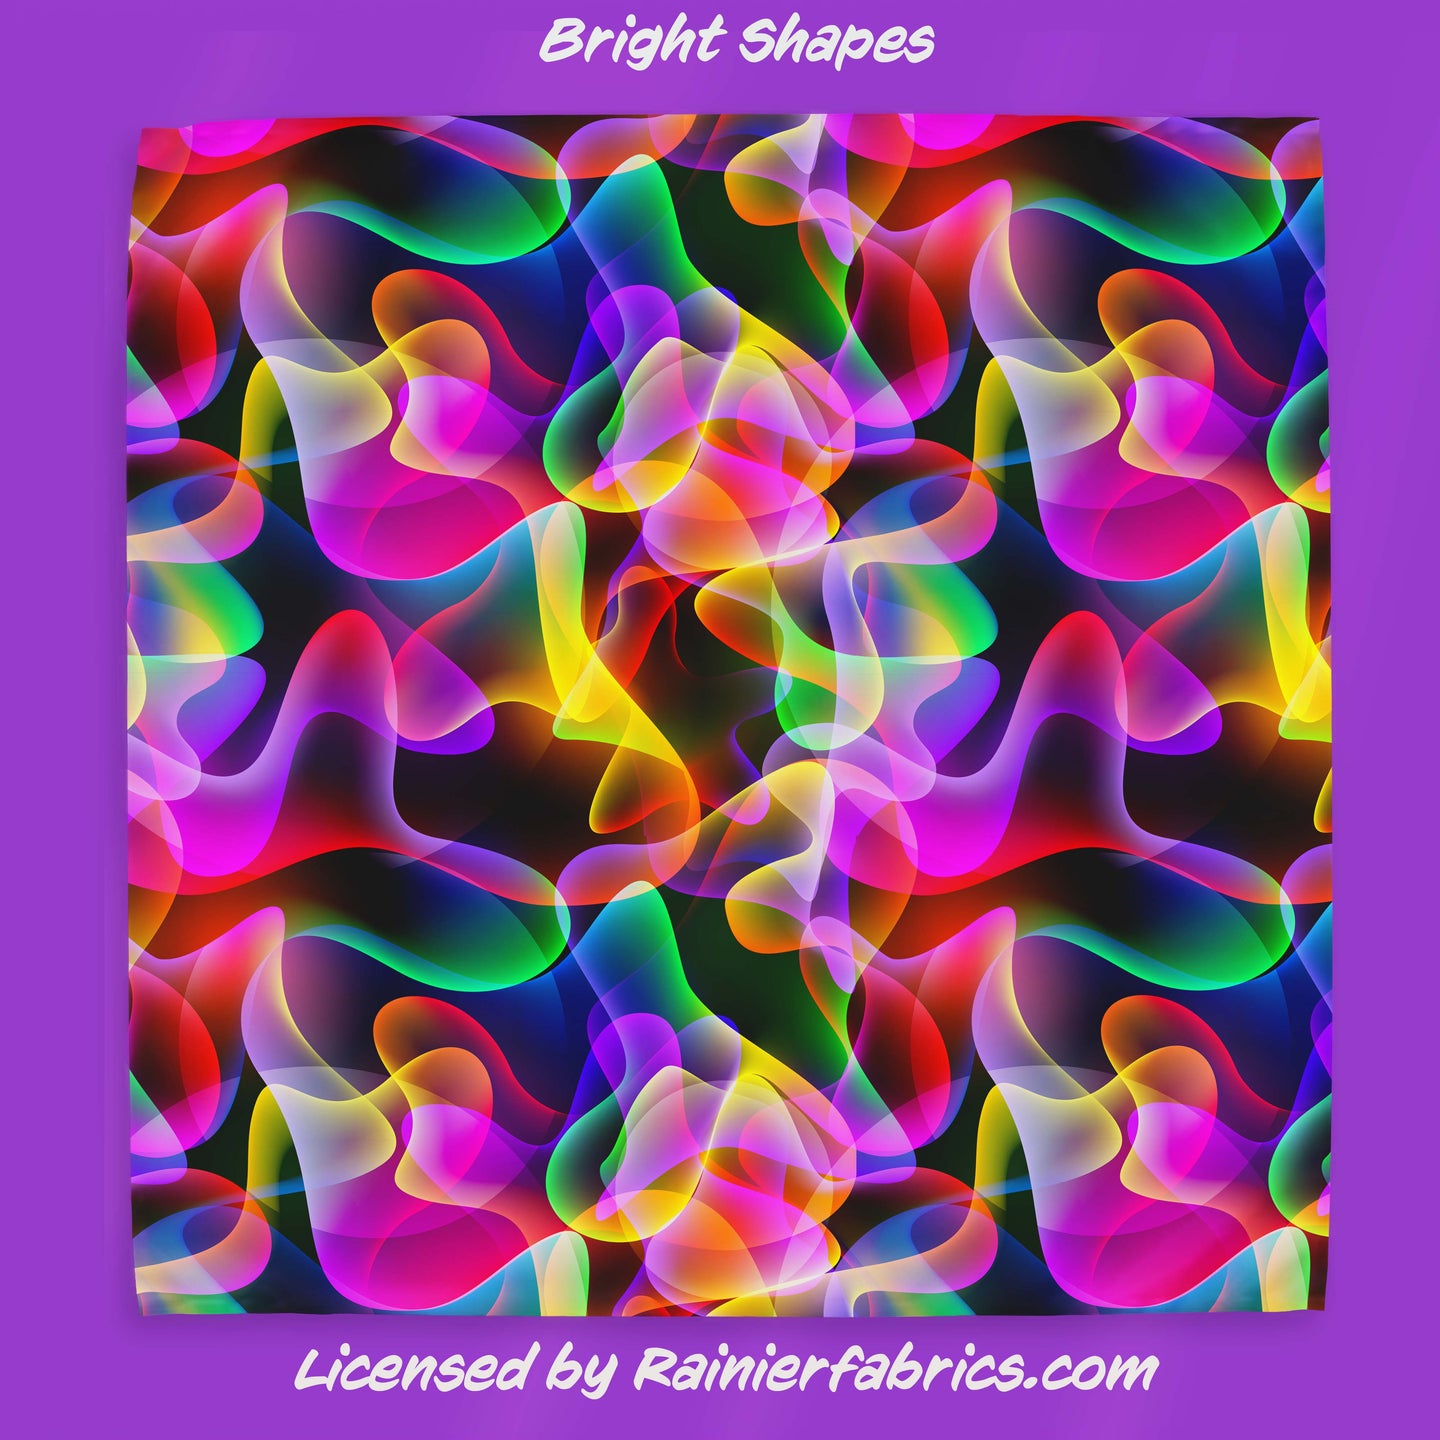 Bright Shapes - 2-5 day TAT - Order by 1/2 yard; Blankets and towels available too